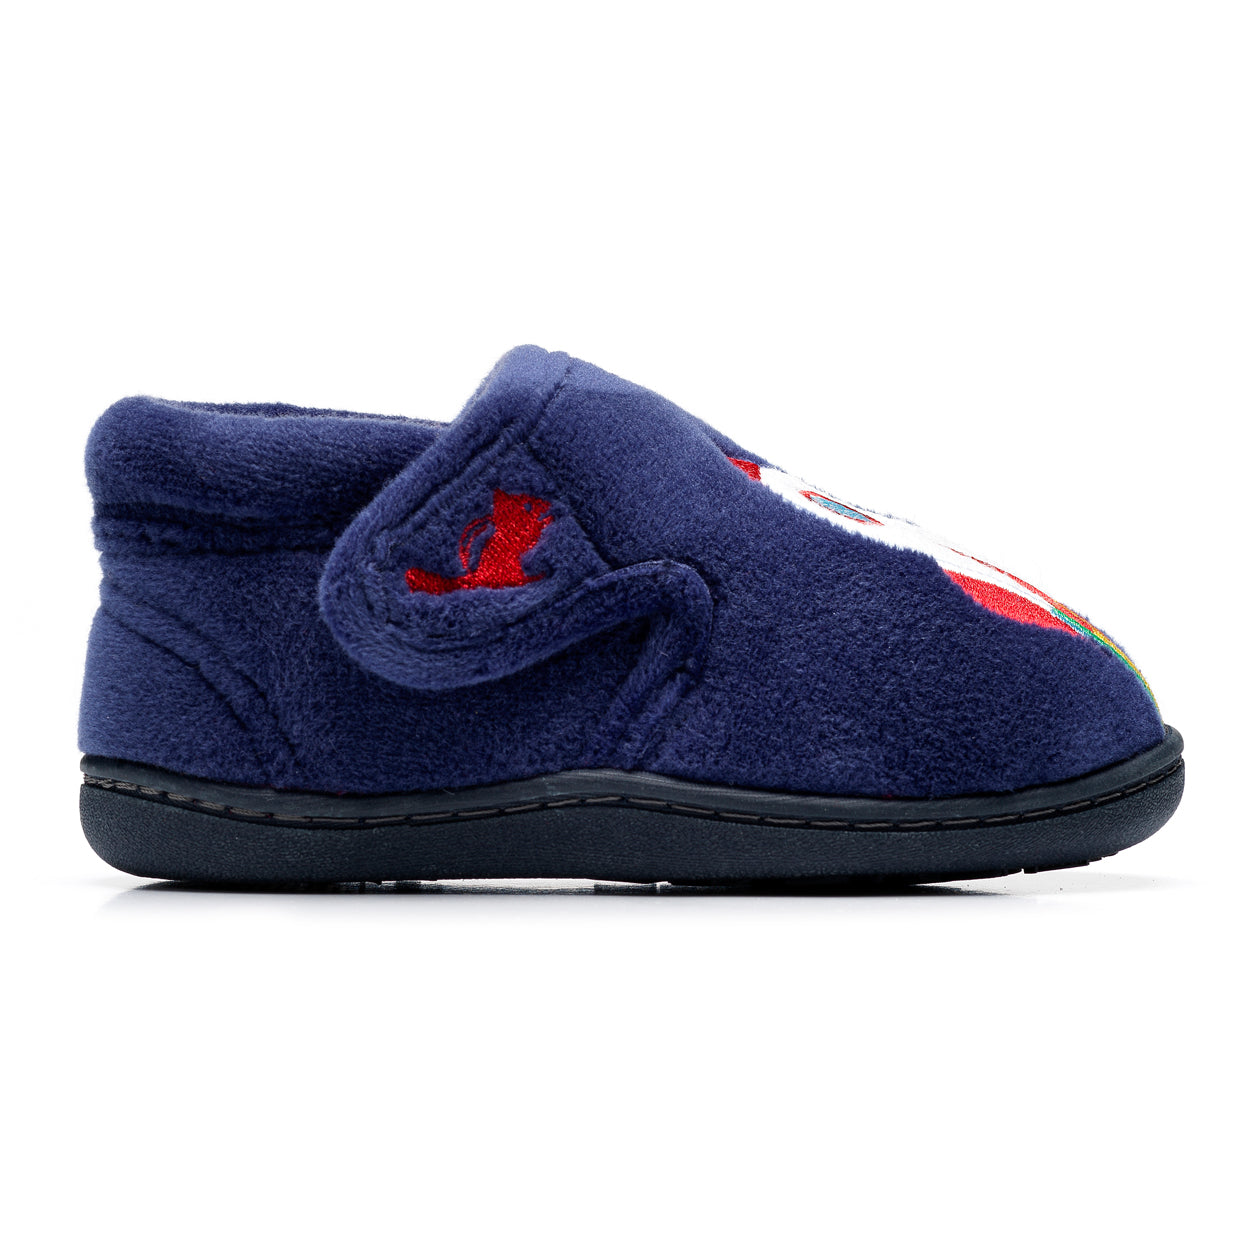 A boys slipper by Chipmunks, style Blast, in navy multi with rocket design and velcro fastening. View of right side.